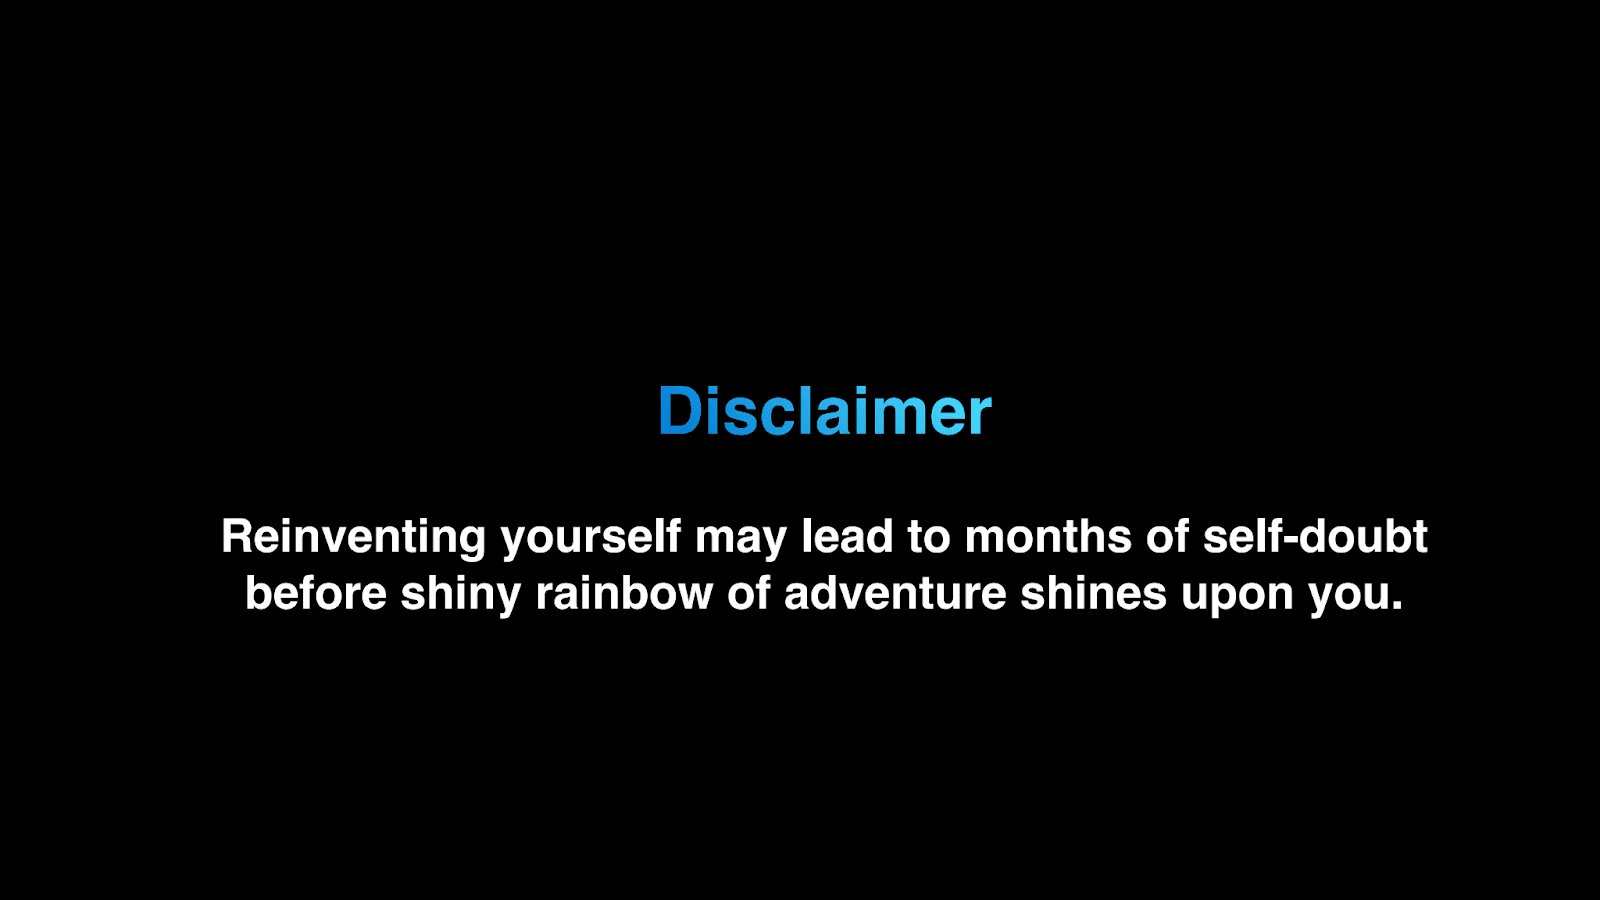 Disclaimer: Reinvening yourself may lead to months of self-doubt.